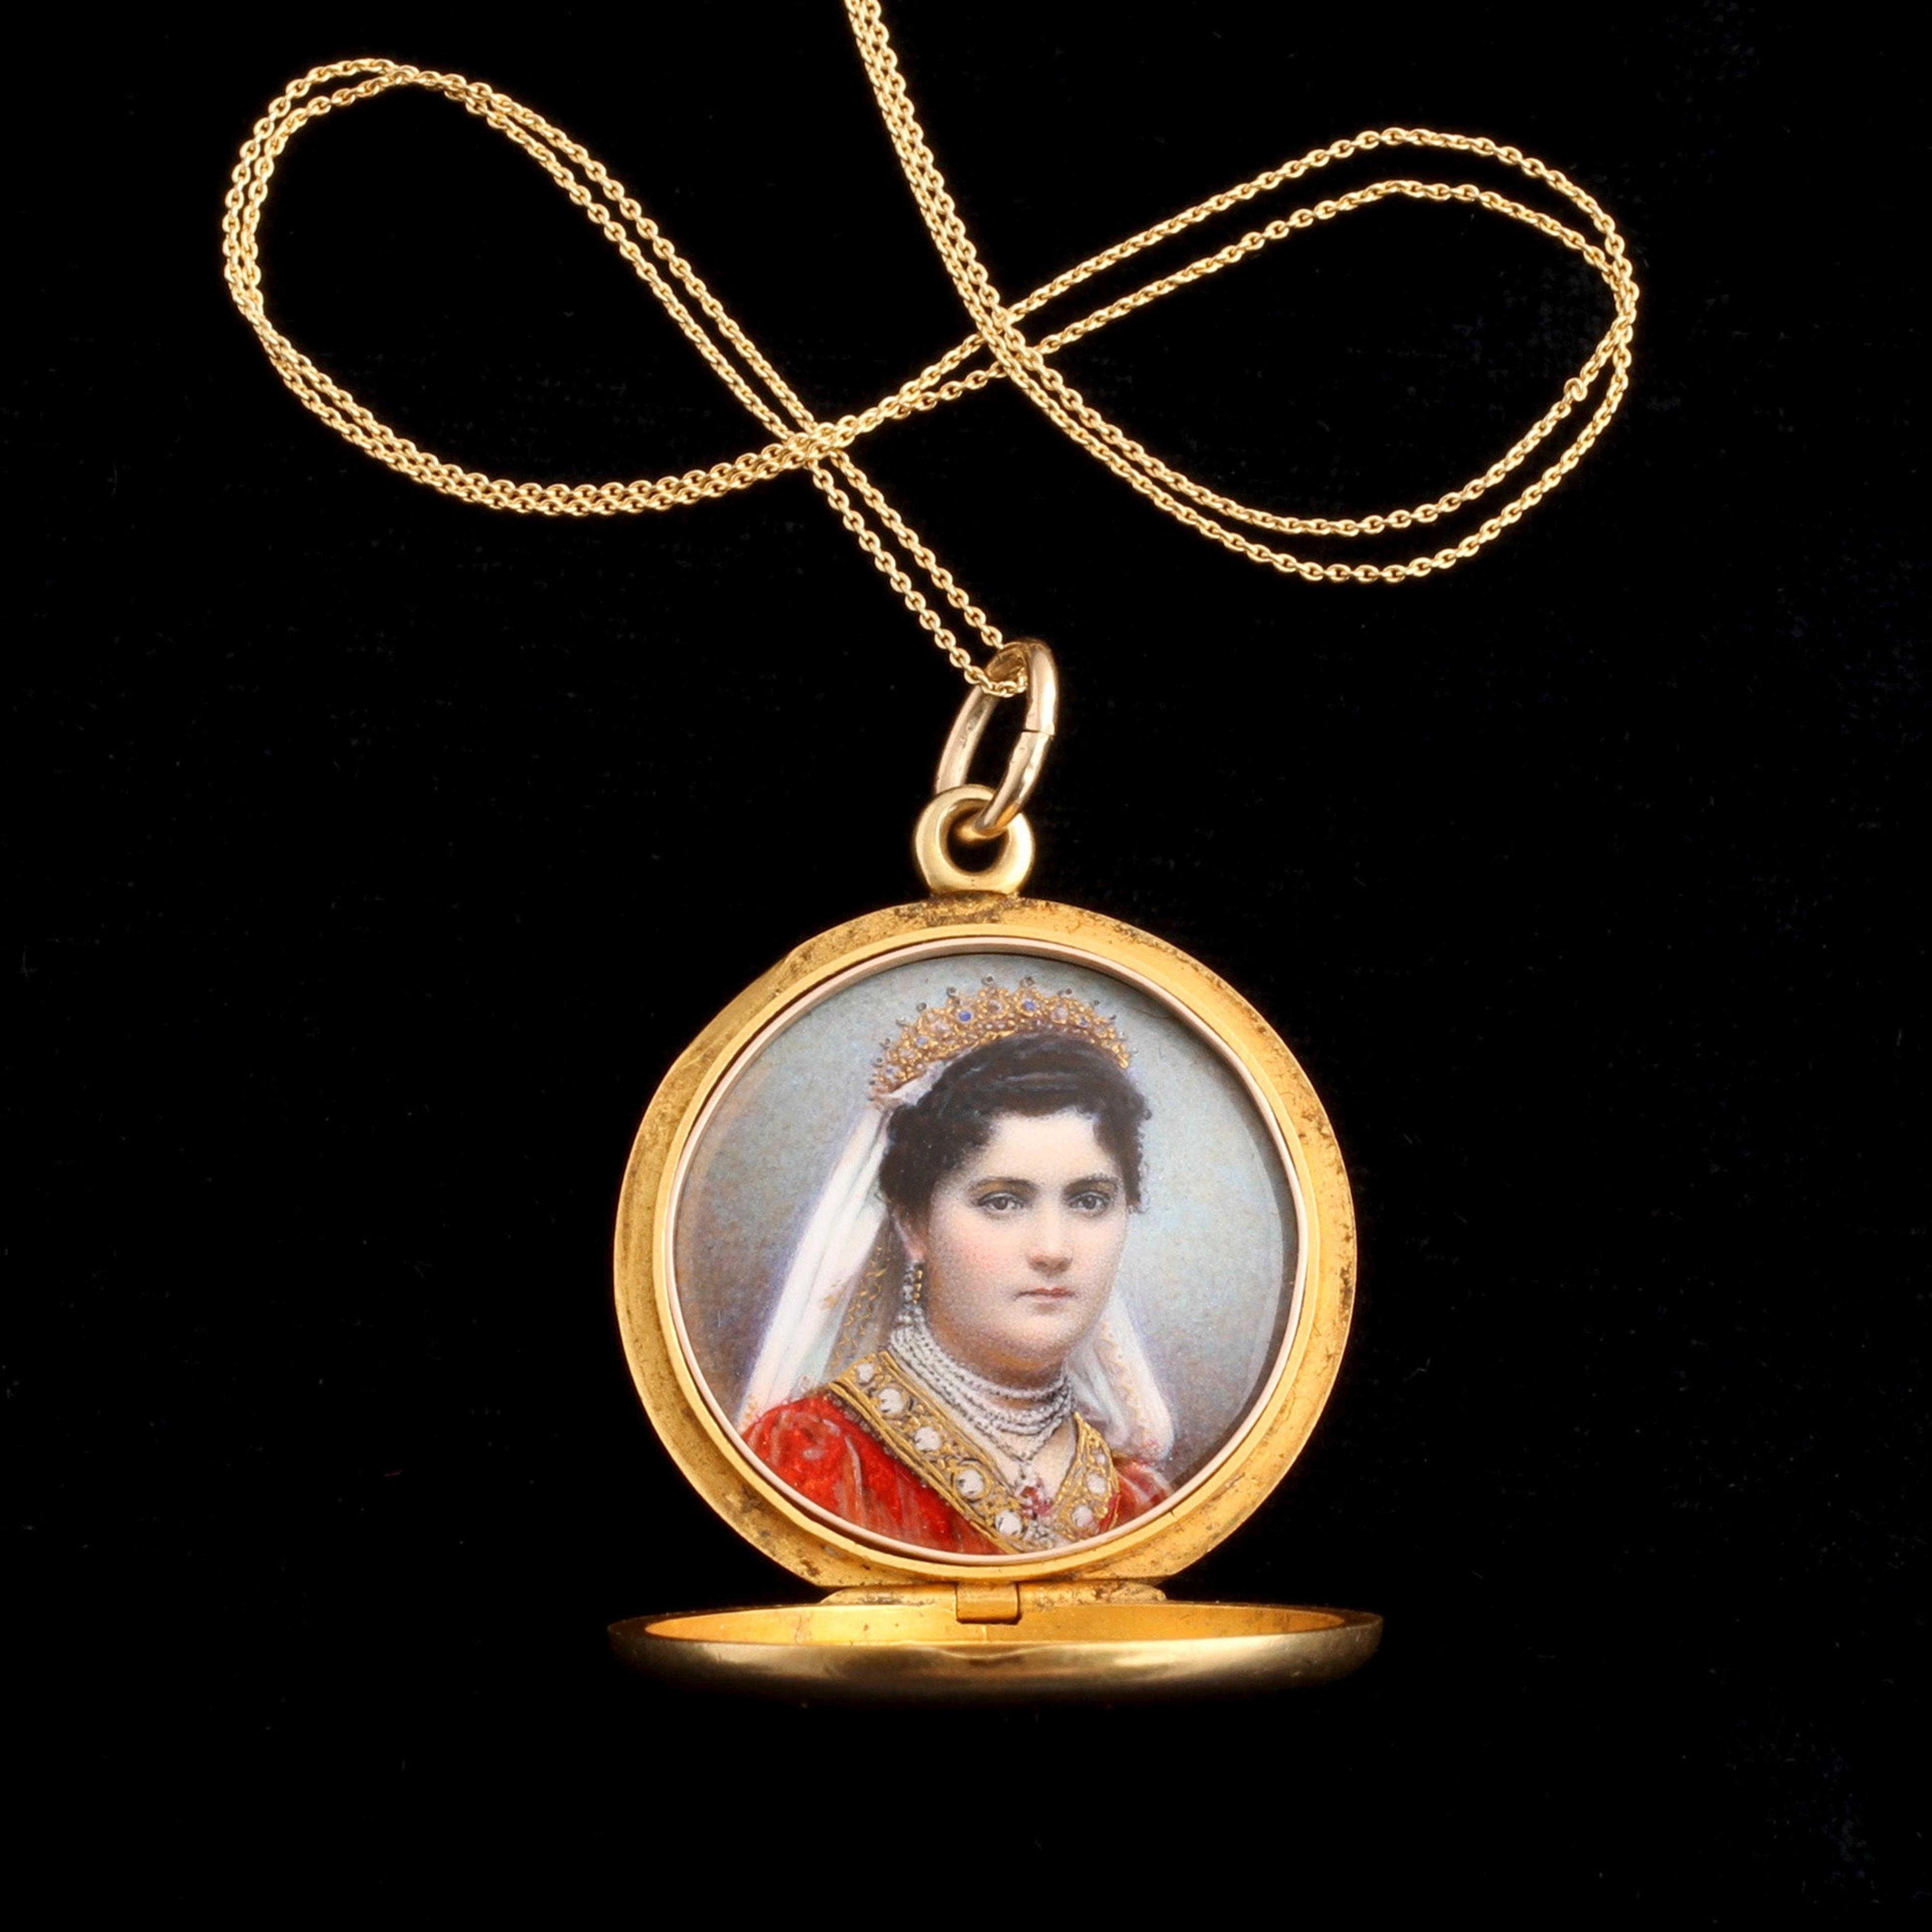 Detail of Victorian Royal Portrait Locket with locket open